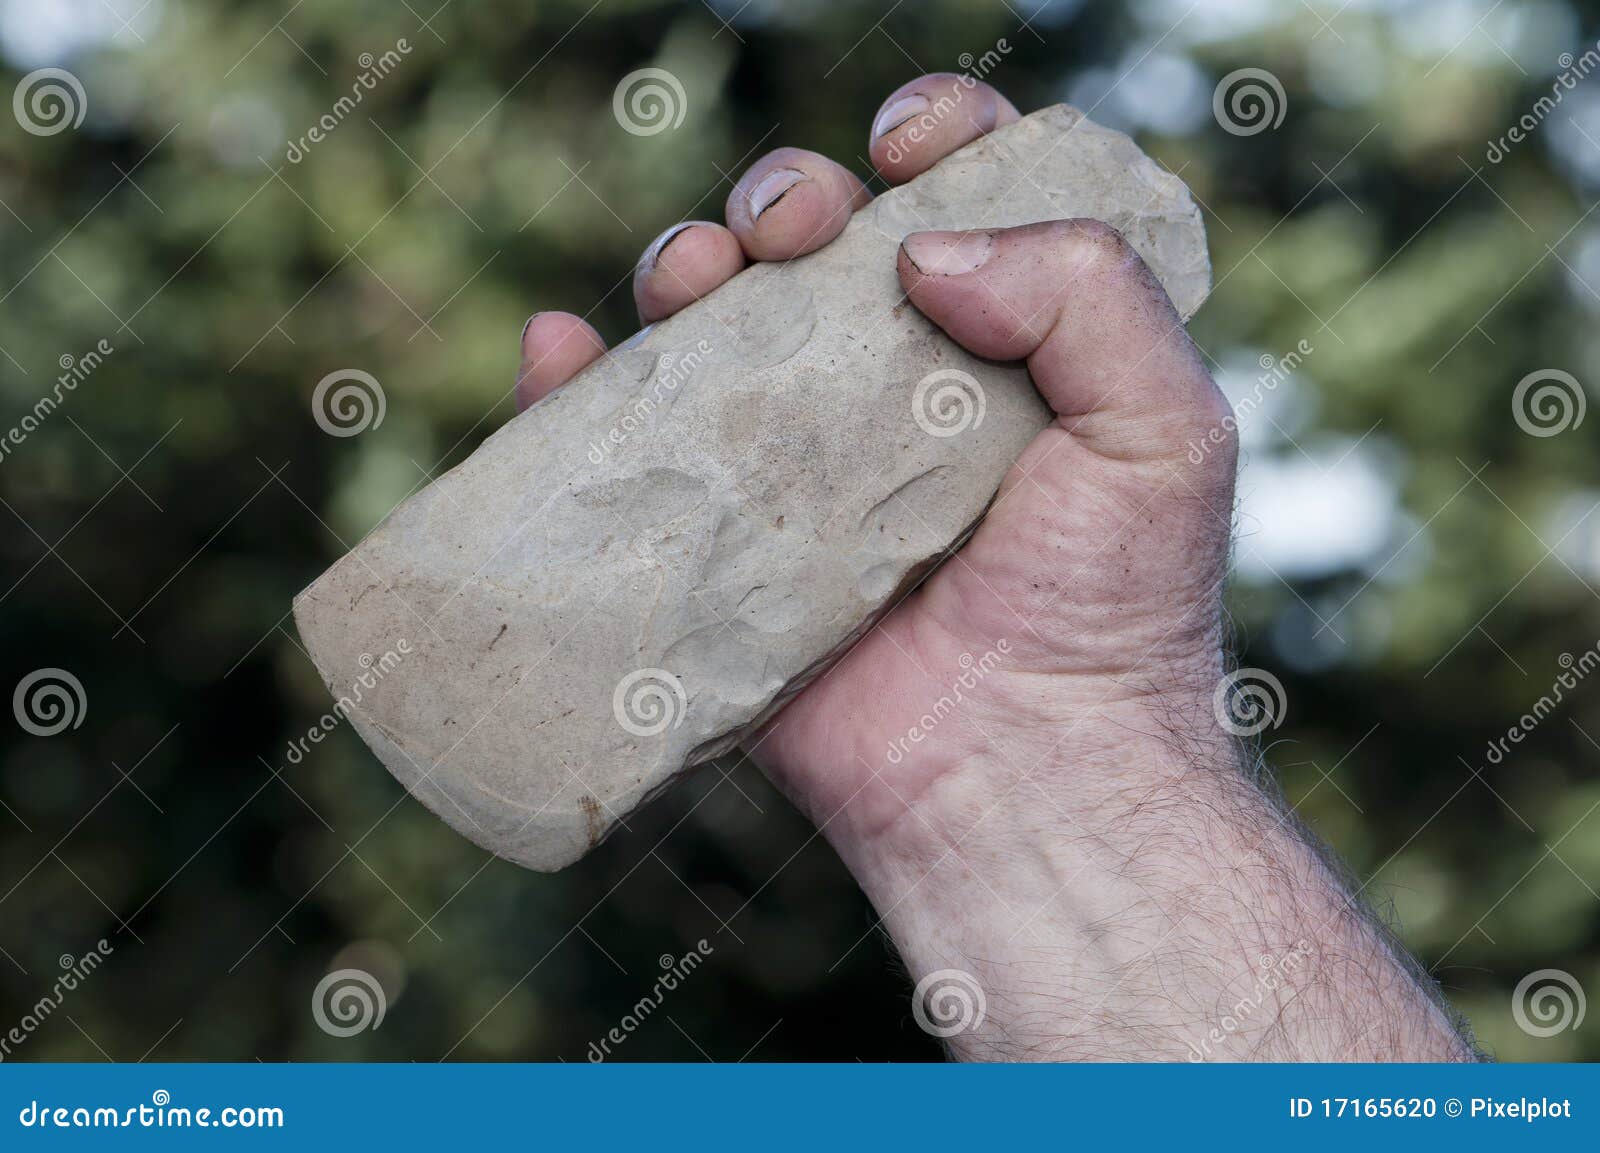 filthy hand holding handaxe